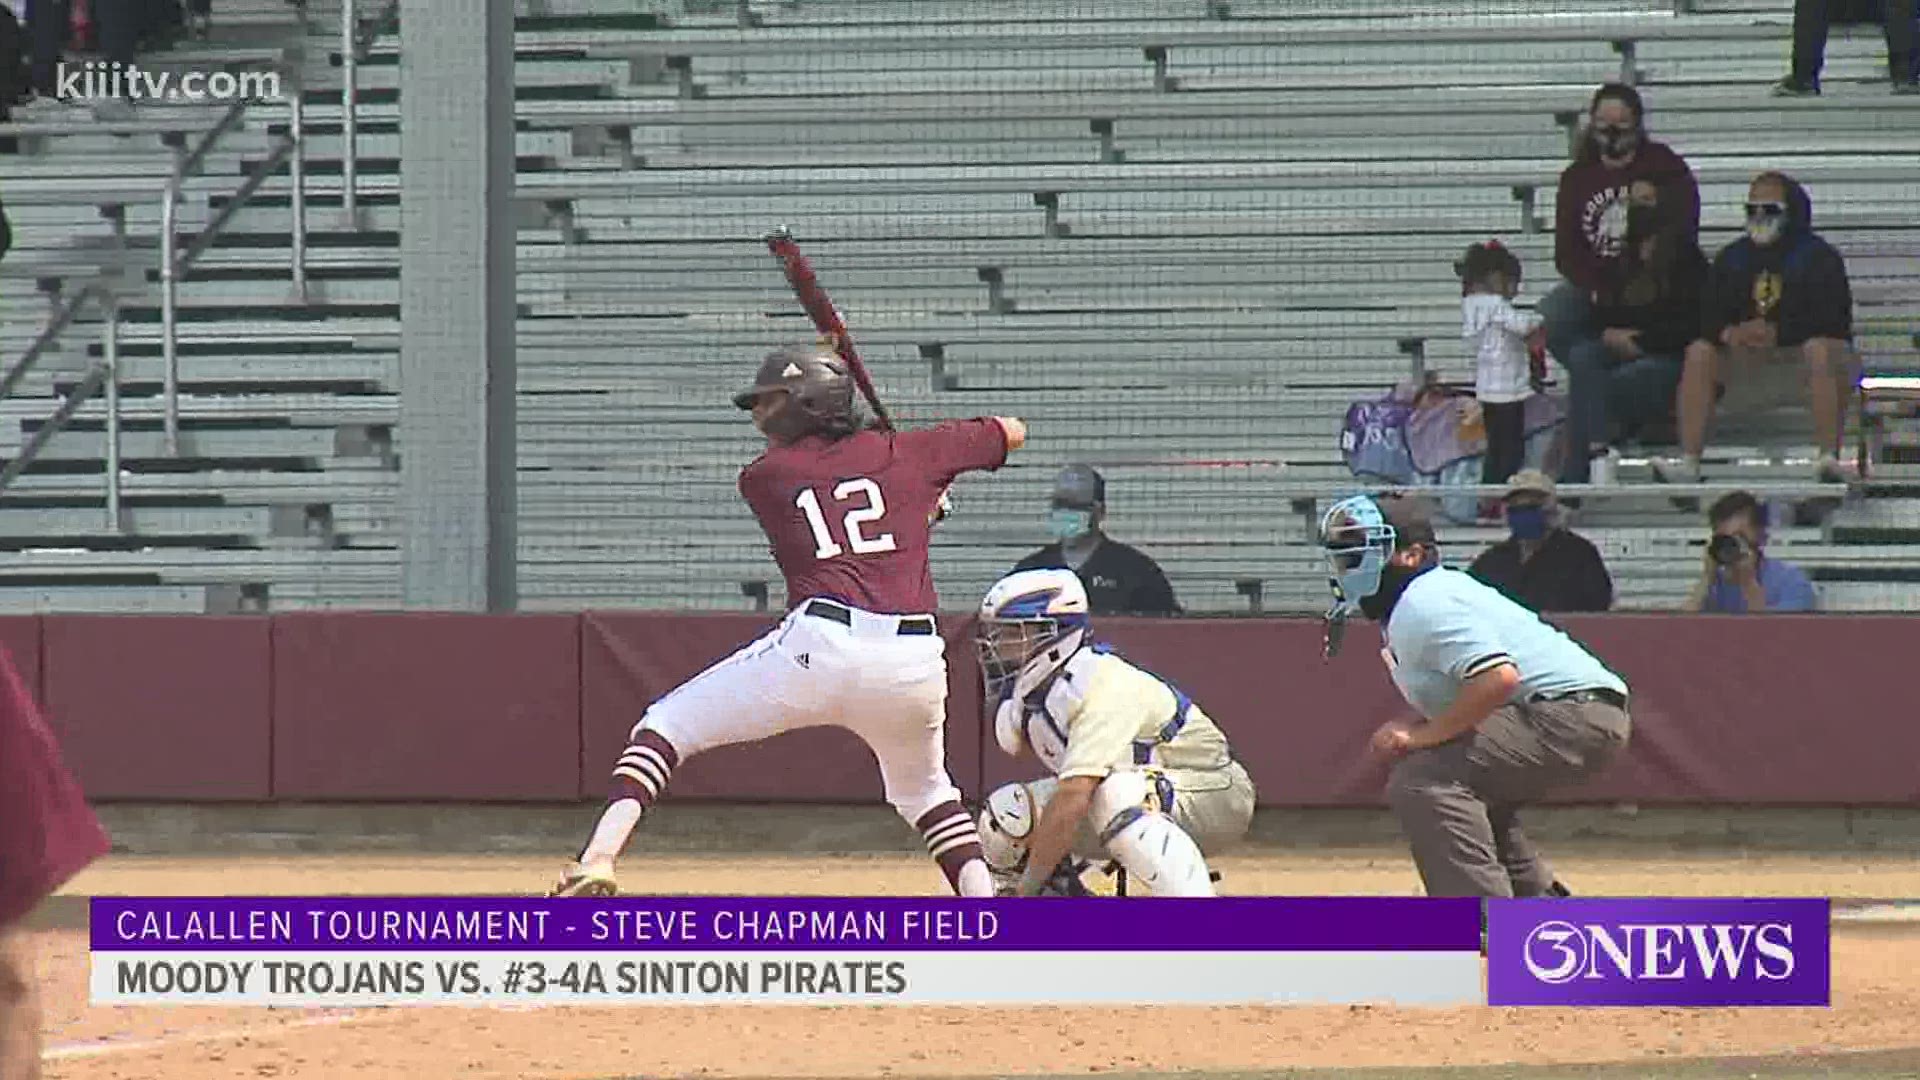 Sinton (#3-4A) beat Moody 4-3 in opening day action of the Calallen Tournament Thursday.